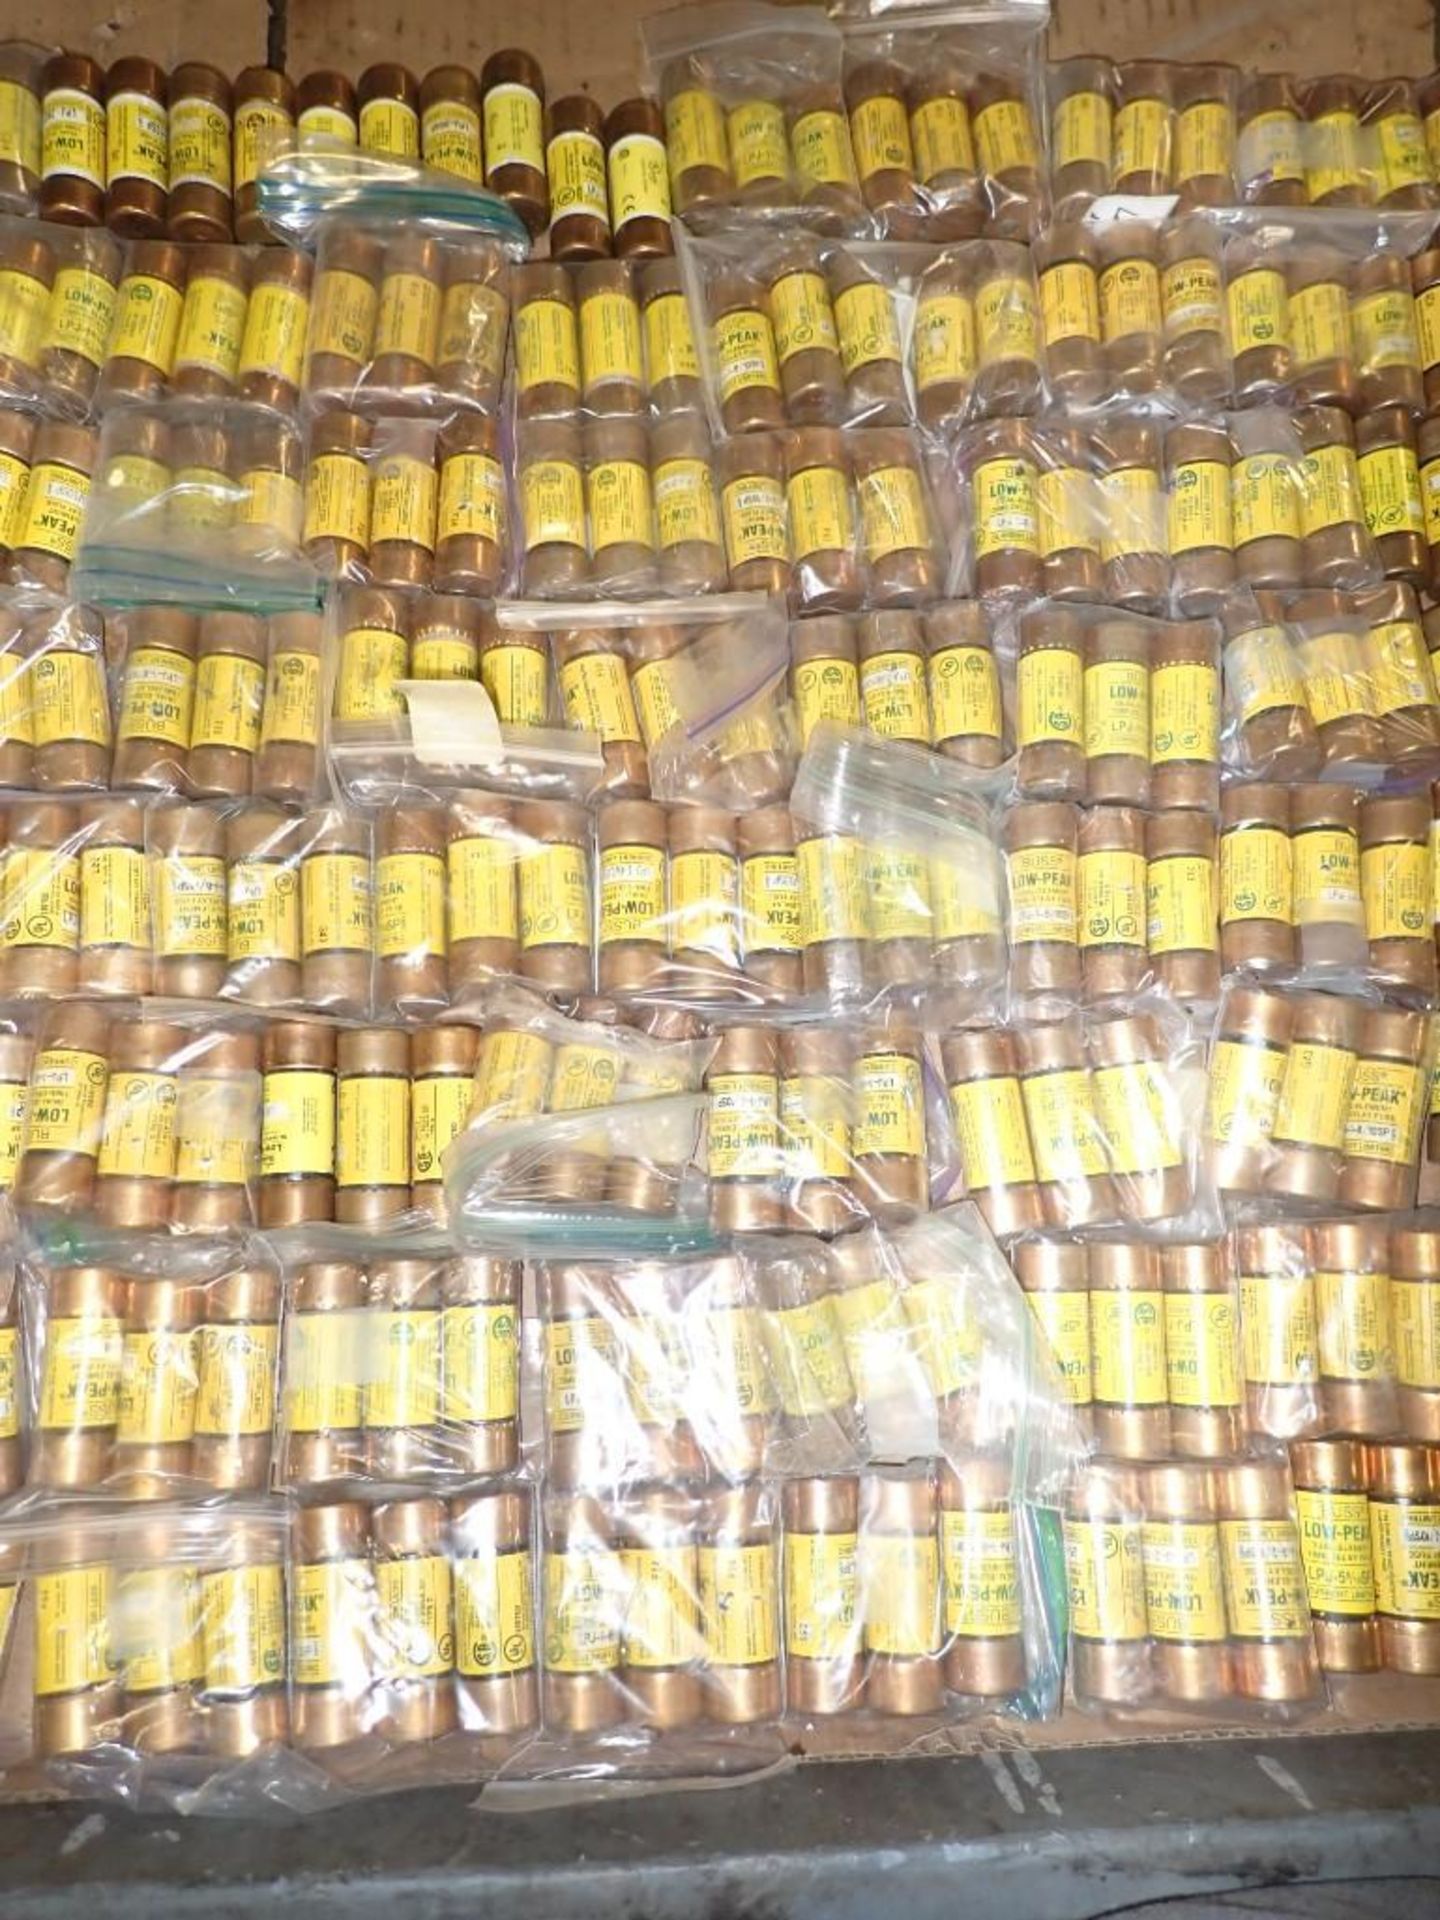 Lot of Buss Fuses - Image 4 of 5